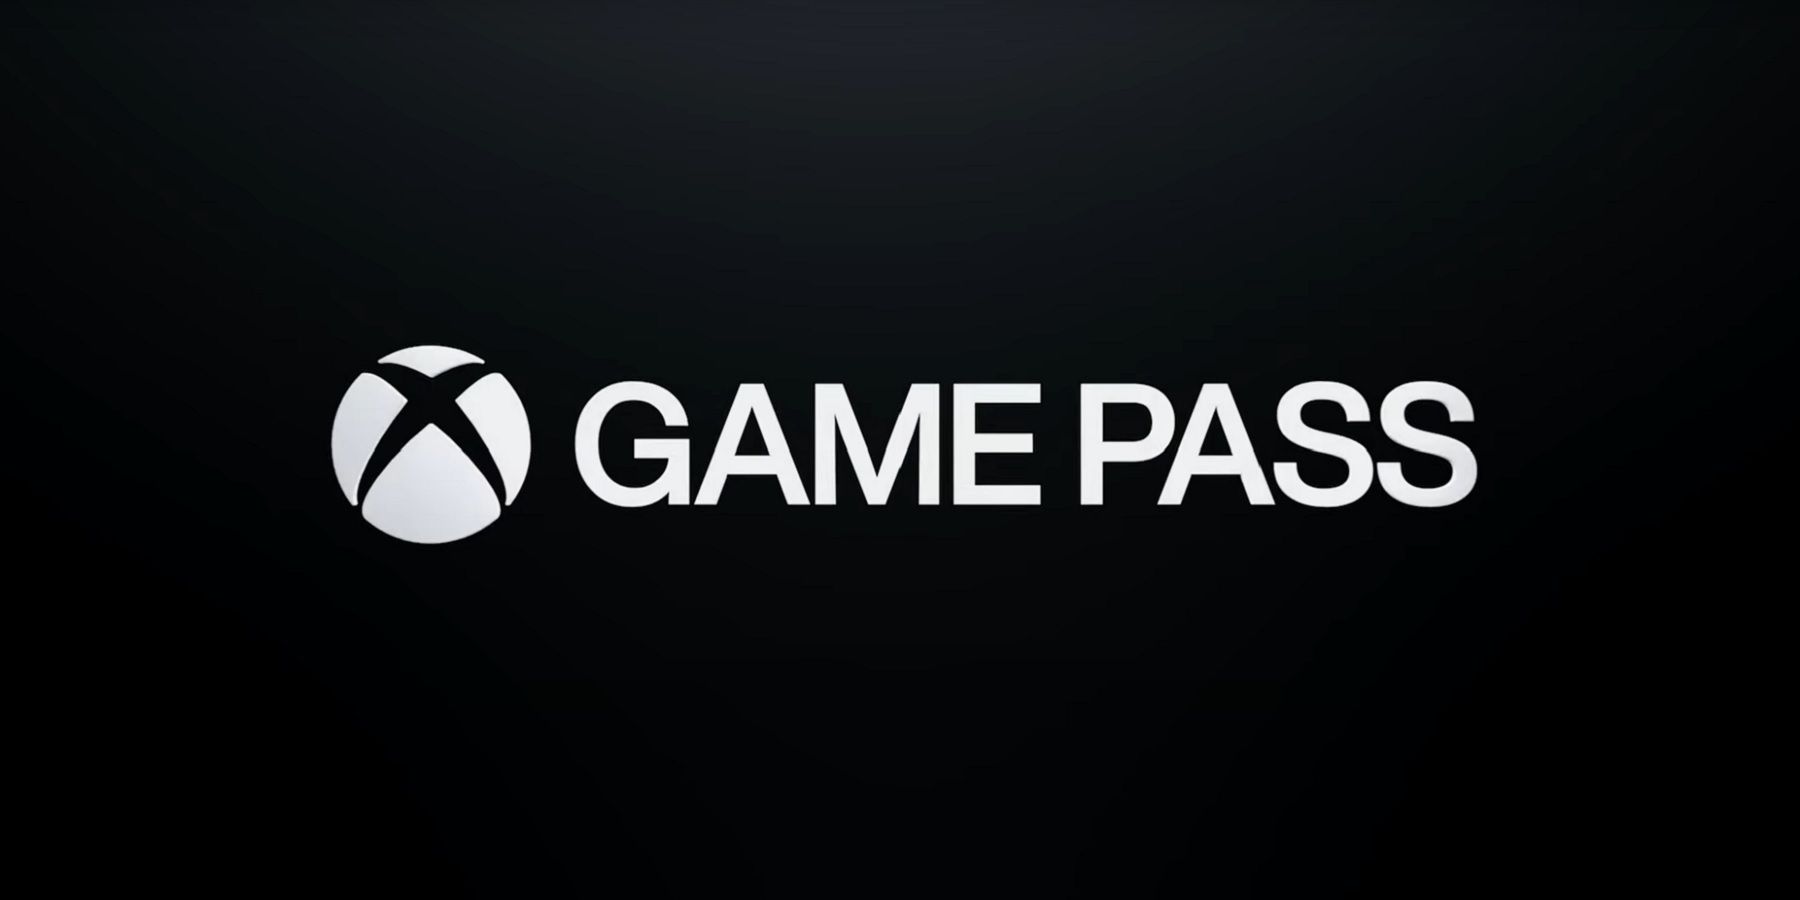 I made a visual list of all confirmed games coming to Game Pass in